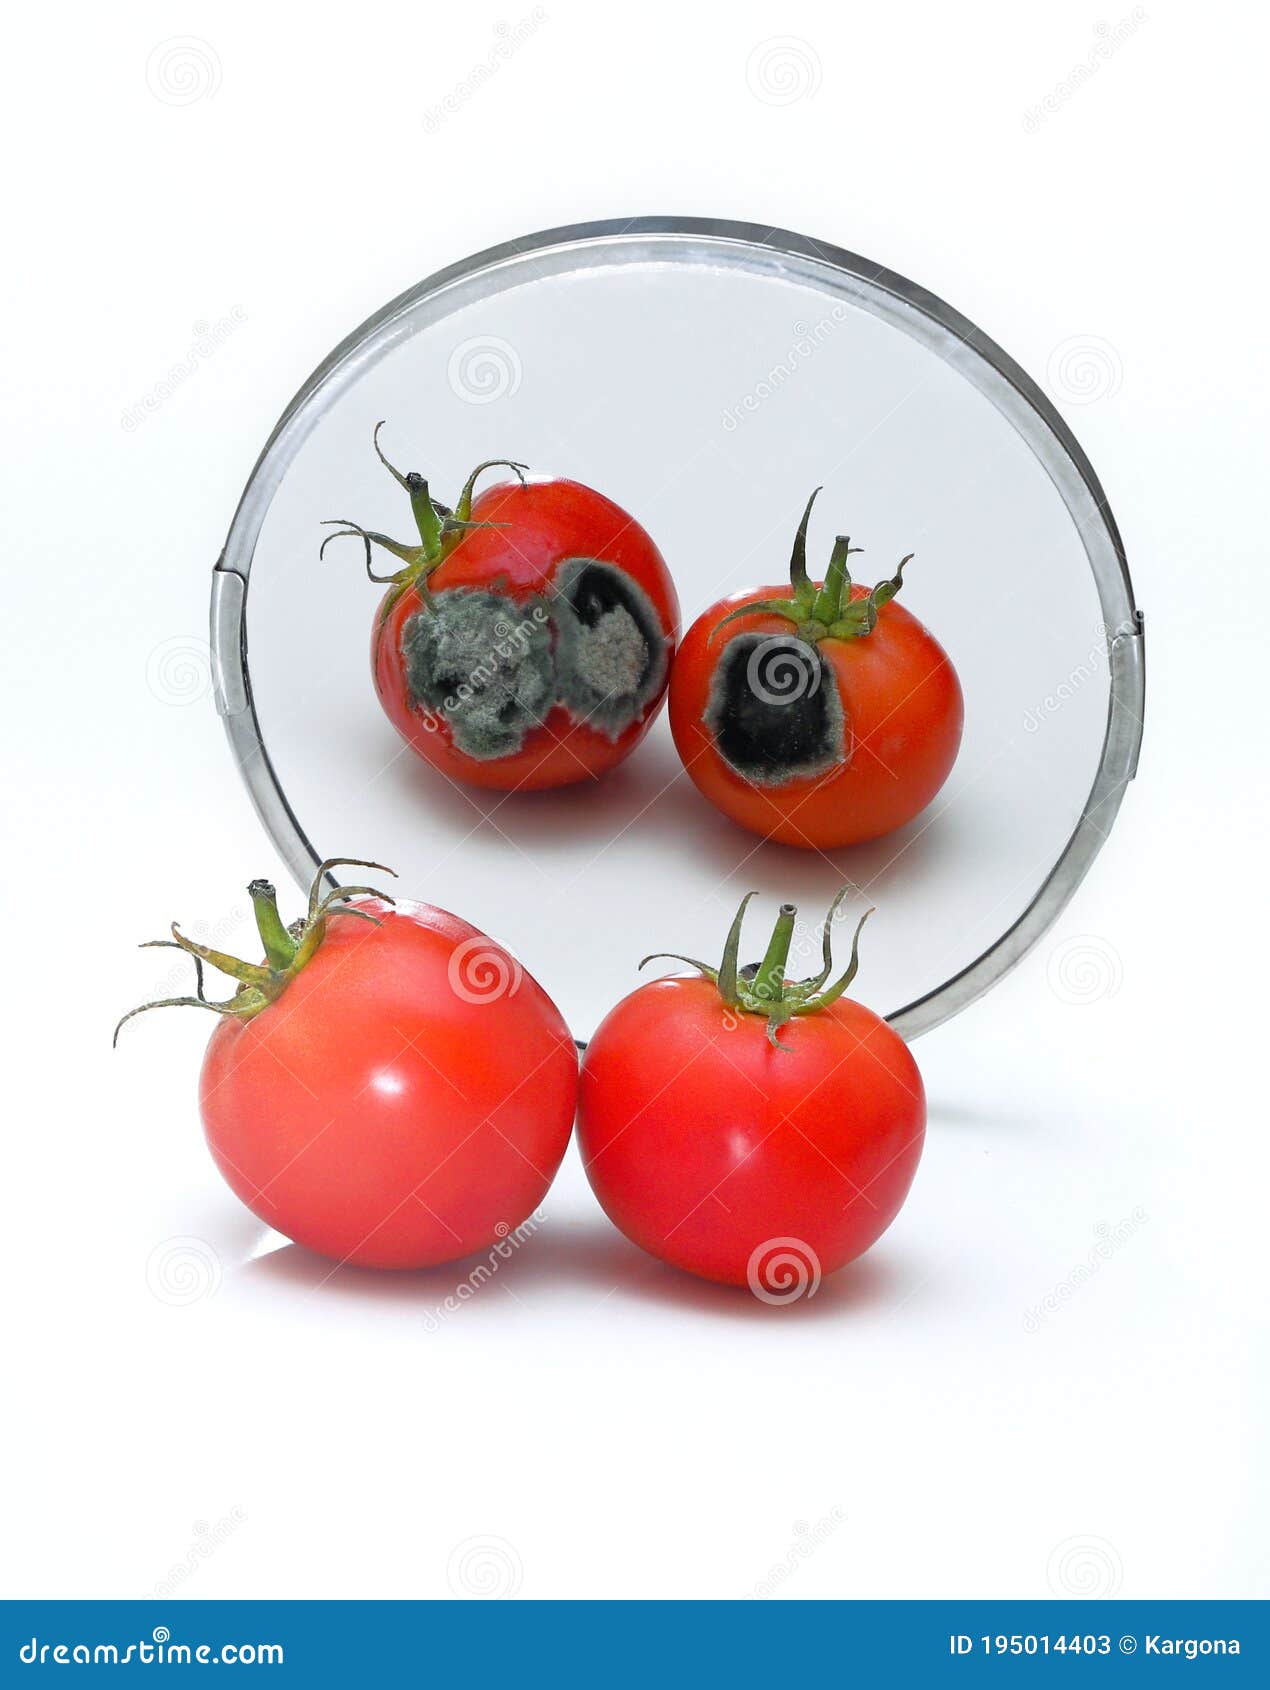 Two Rotten Tomatoes Reflected In The Mirror Isolated On White Spoiled Character Concept Expectation Vs Reality Concept Stock Image Image Of Environment Food 195014403